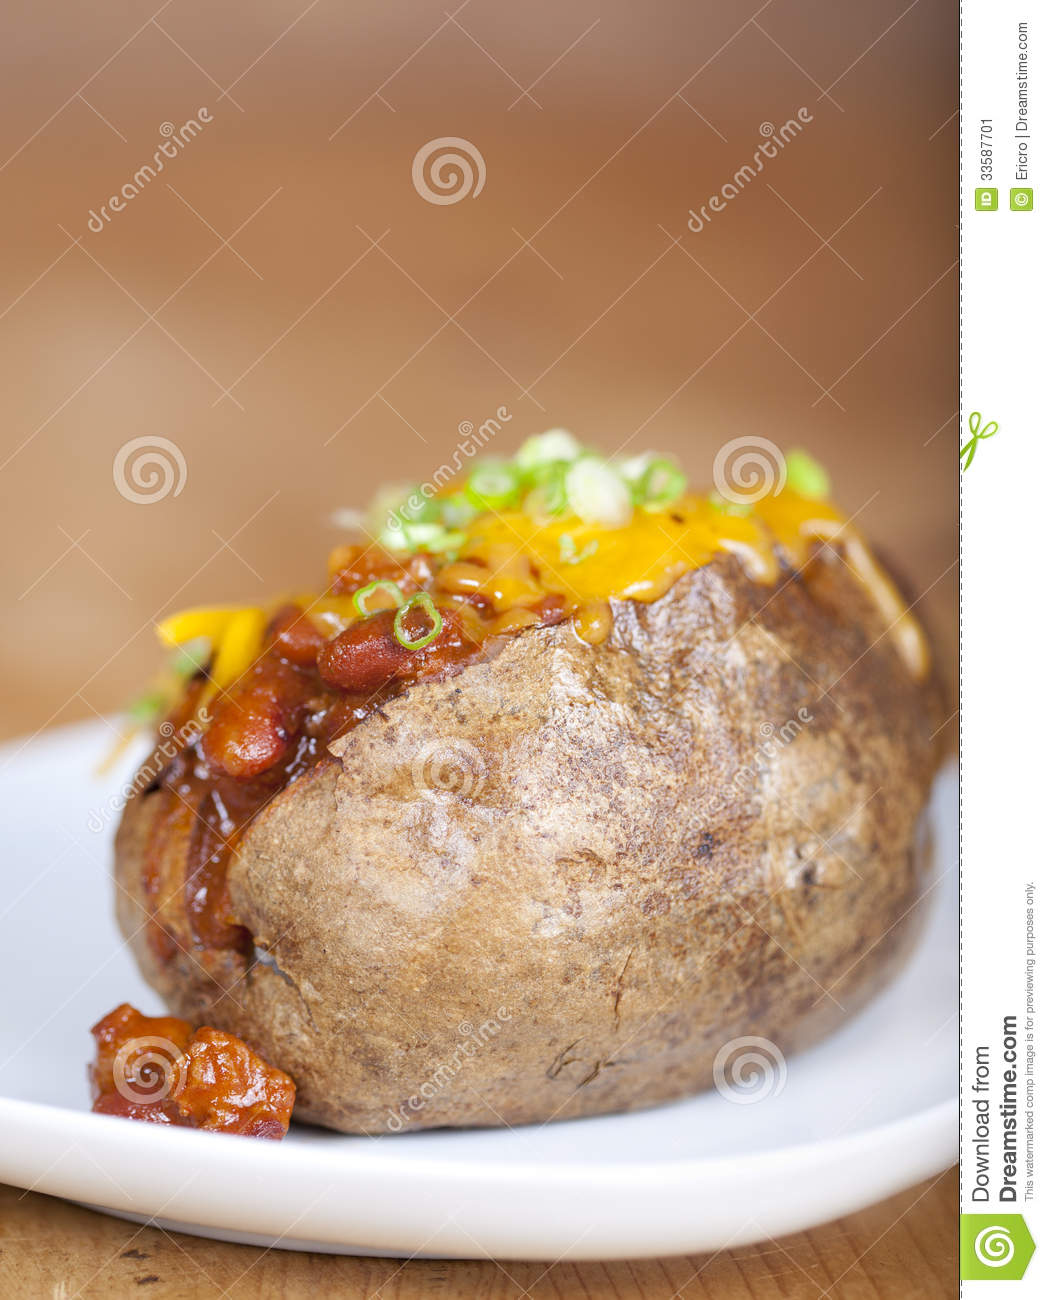 Loaded Baked Potato With Chili And Cheese On A Plate Stock Image    